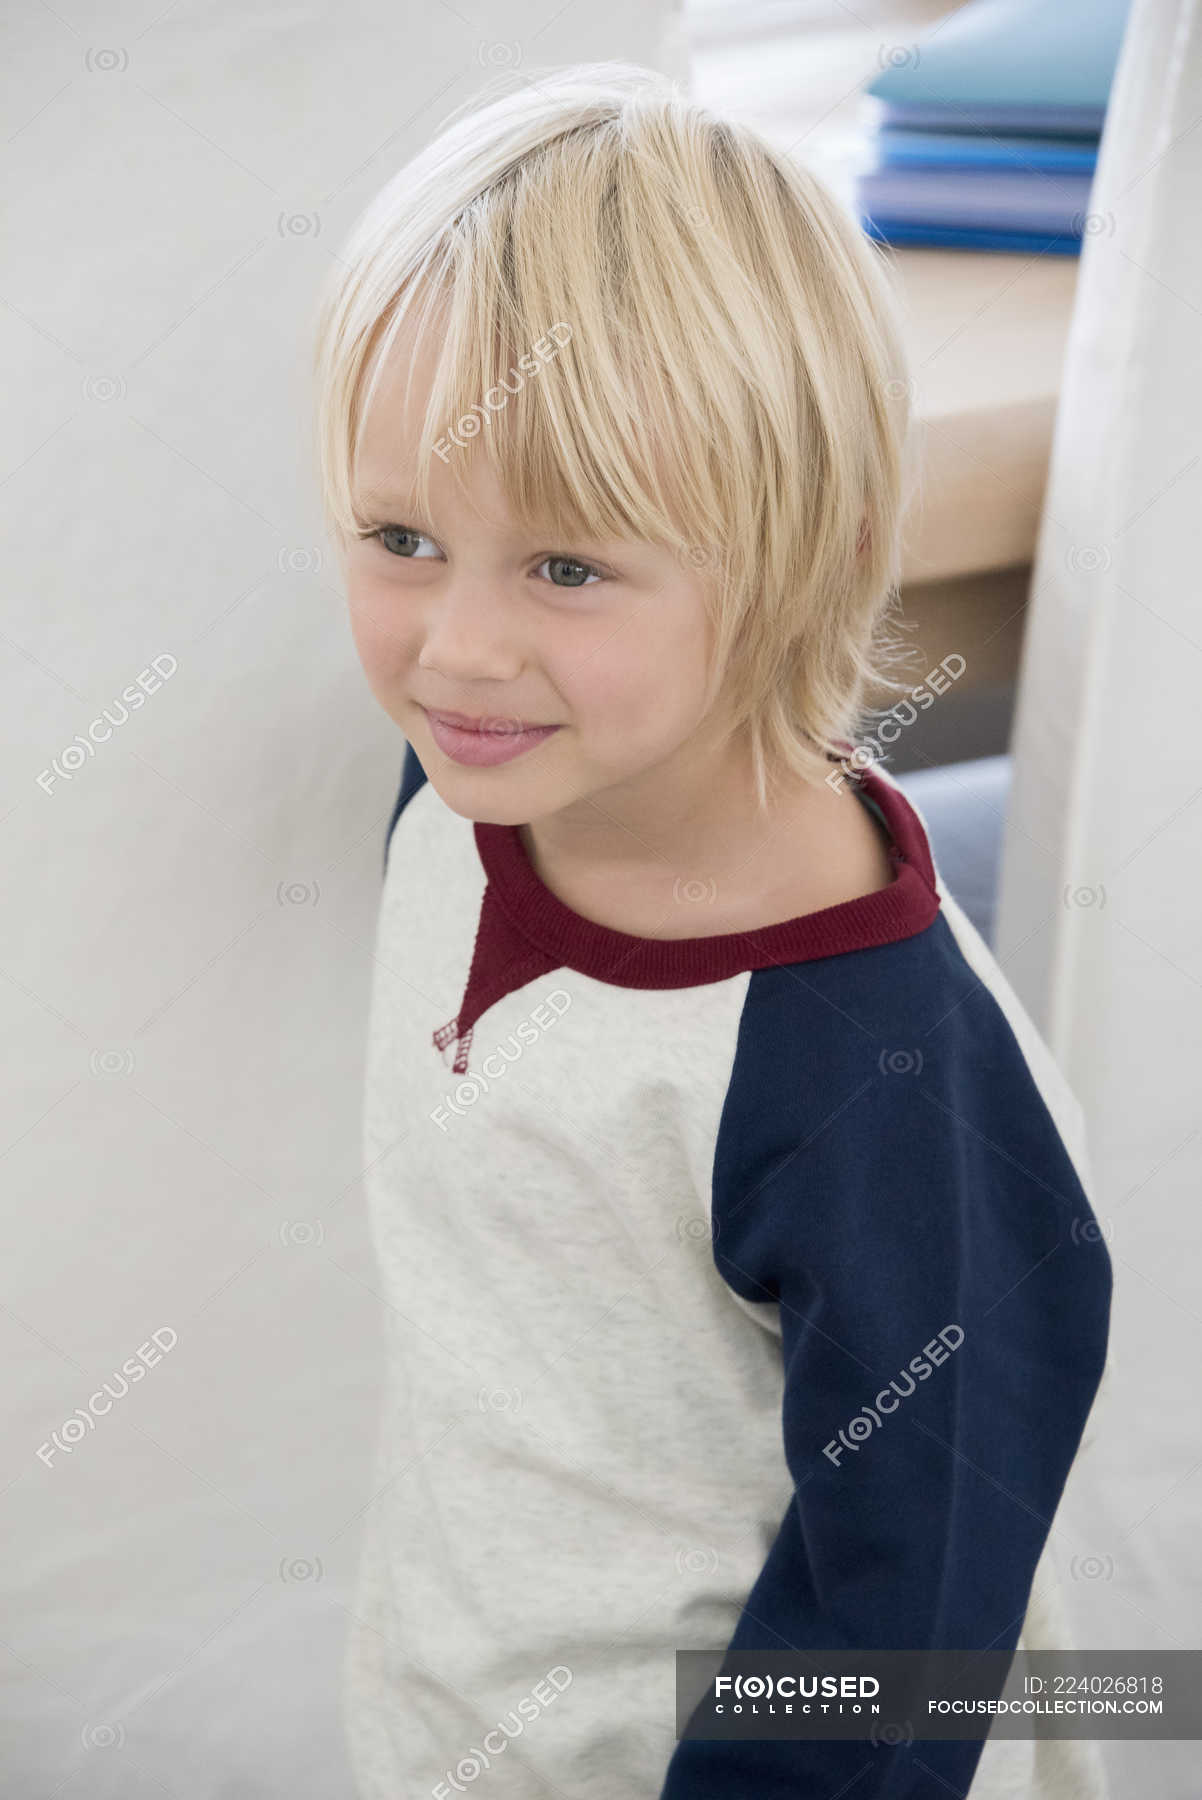 Close Up Of Happy Little Boy With Blonde Hair Looking Away Indoors